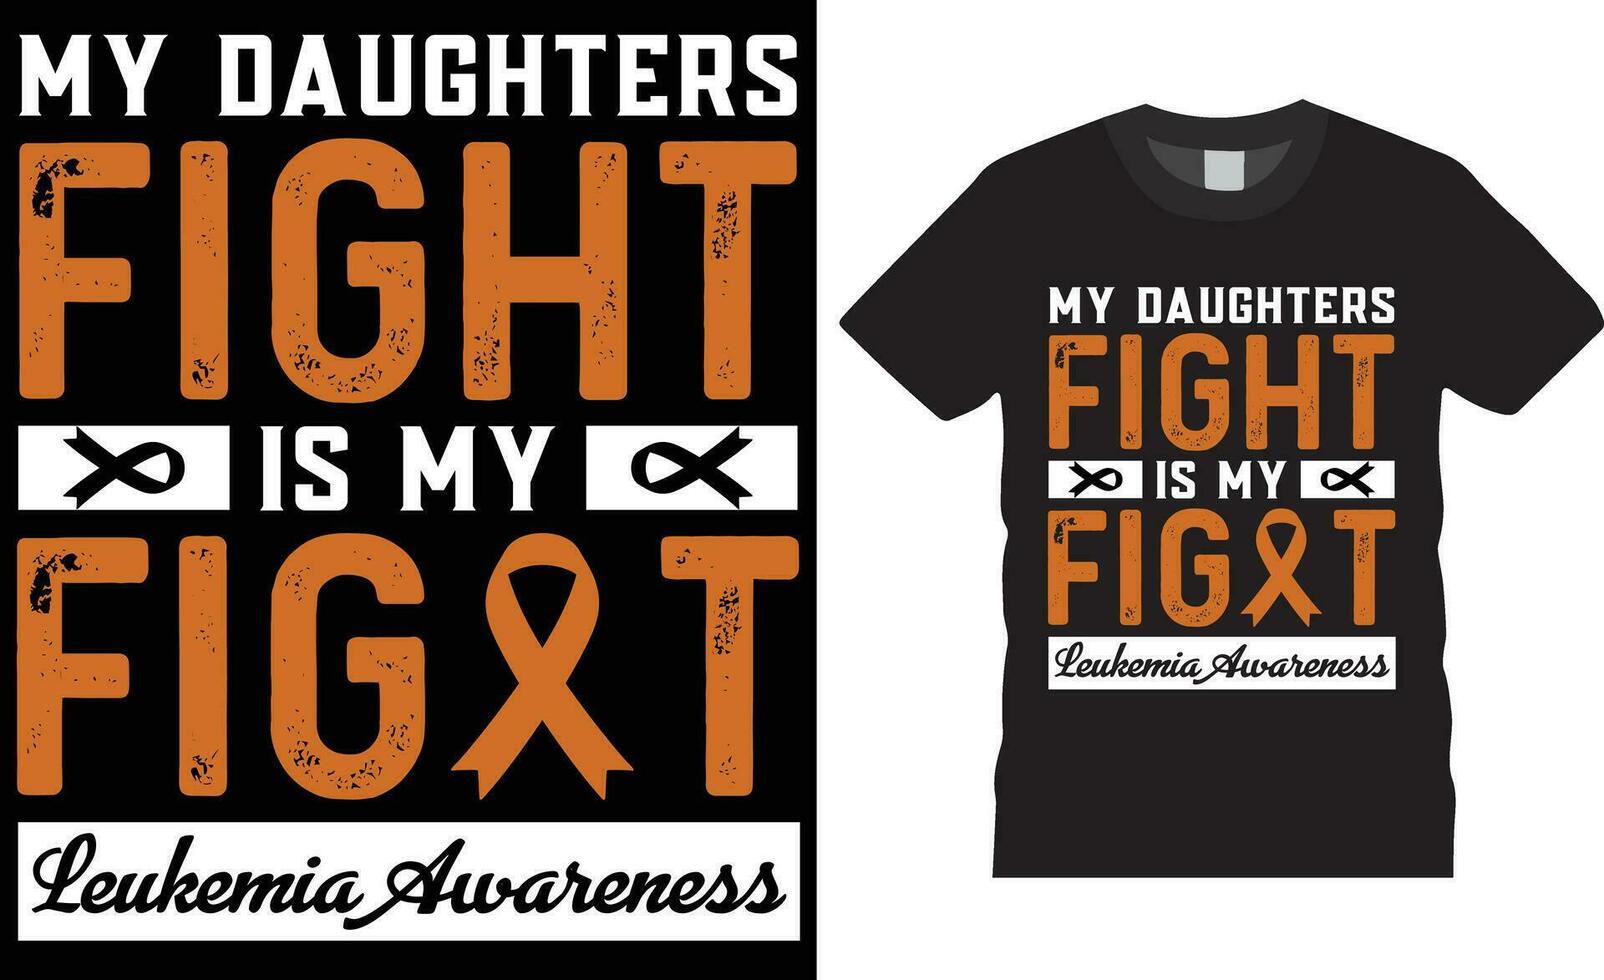 Leukemia awareness Typography t shirt design print for template.My daughters fight is my fight leukemia awareness vector